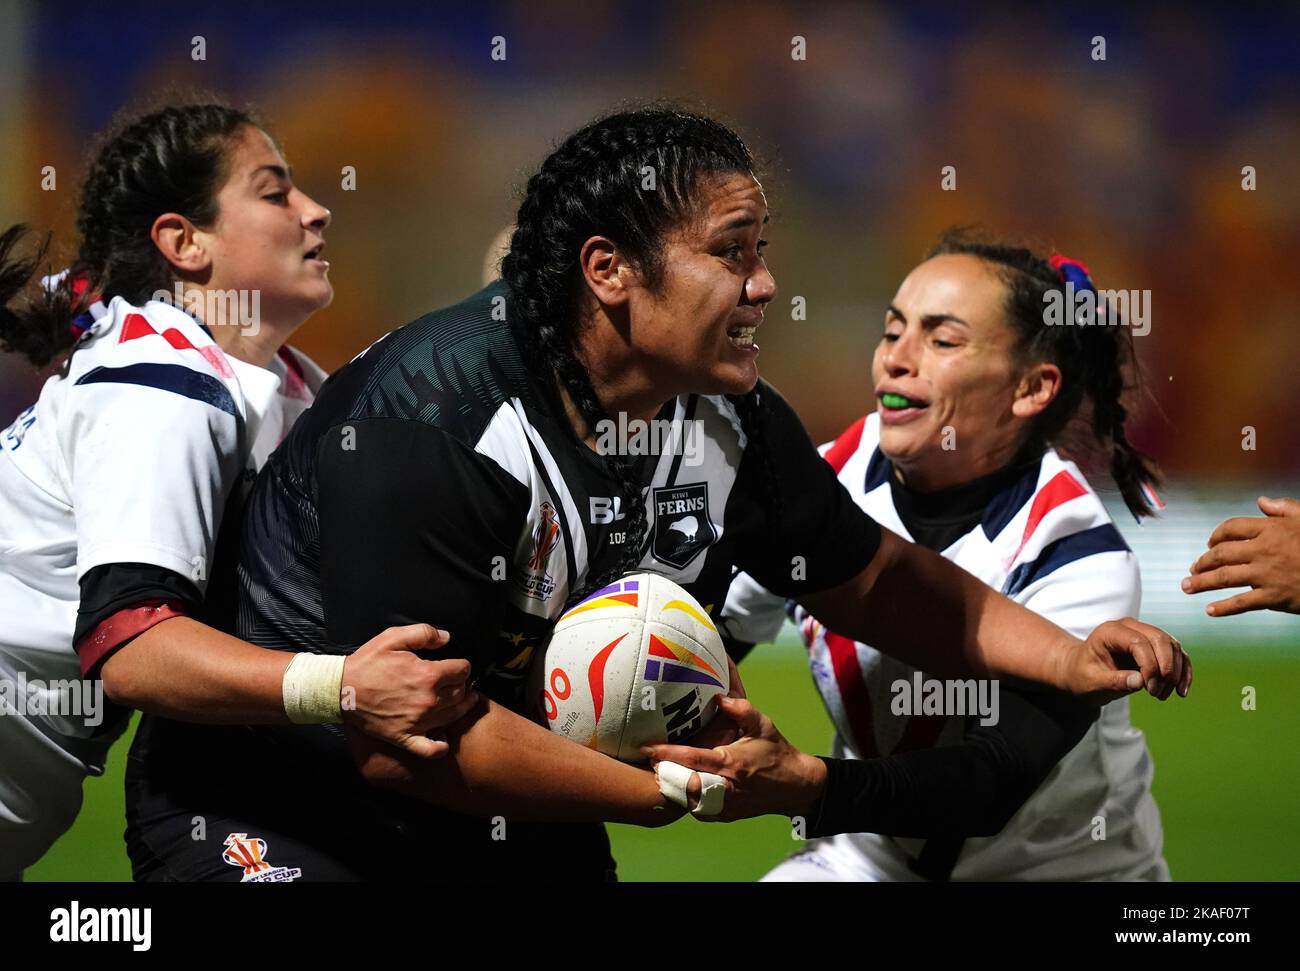 New Zealand's Amber Hill is tackled by France's Elisa Ciria and Alice Varela during the Women's Rugby League World Cup group B match at the LNER Community Stadium, York. Picture date: Wednesday November 2, 2022. Stock Photo